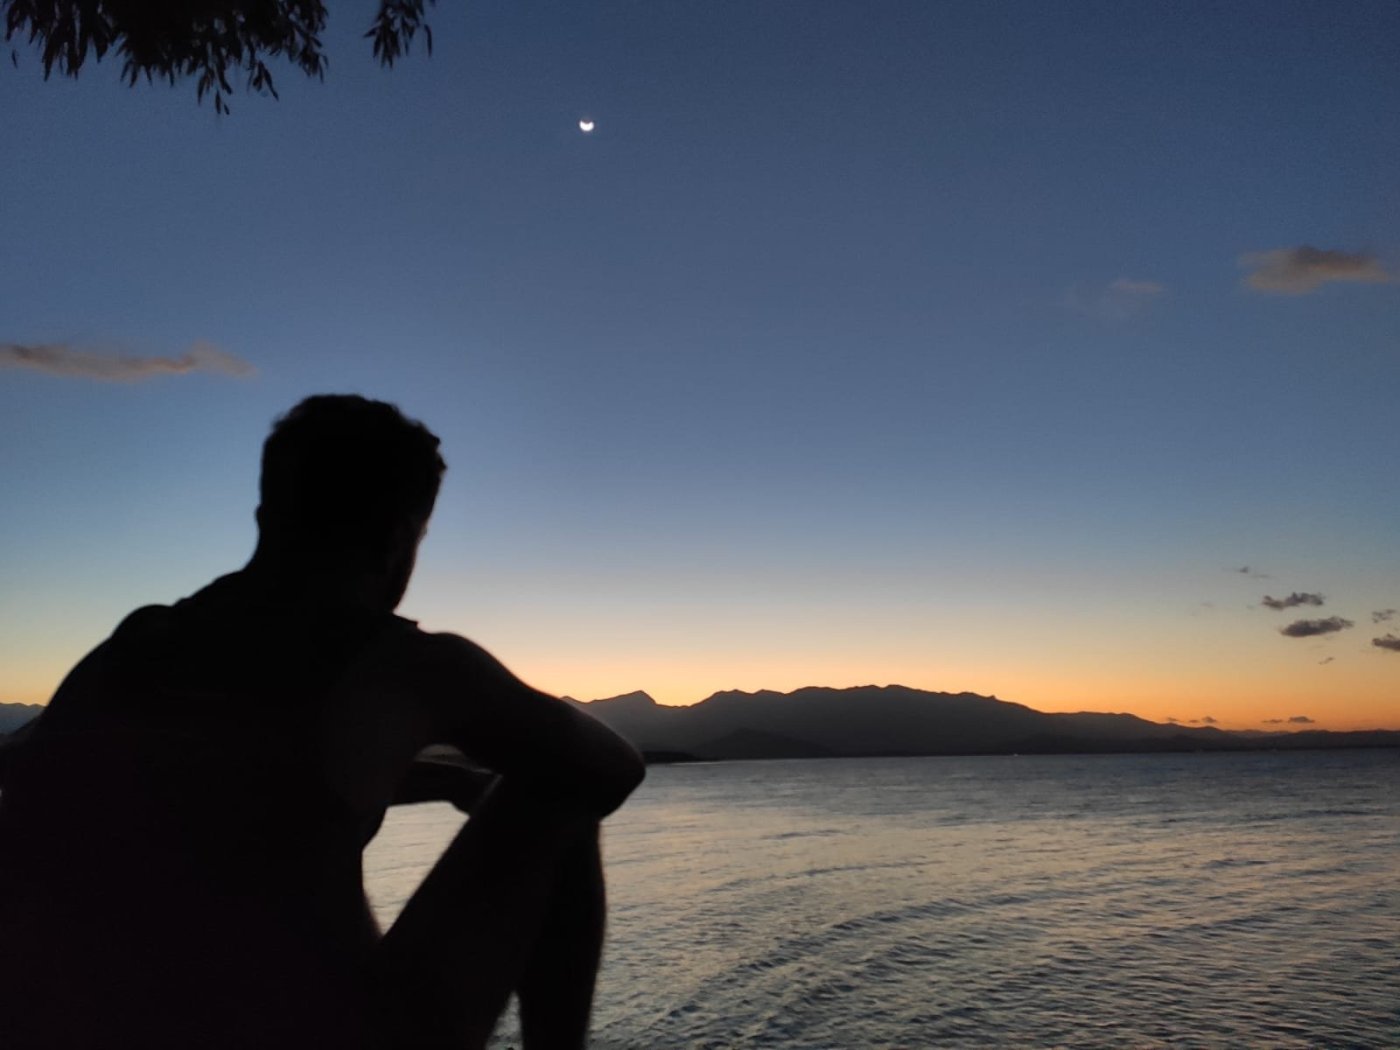 Calum in the foreground of a sunset at Port Douglas